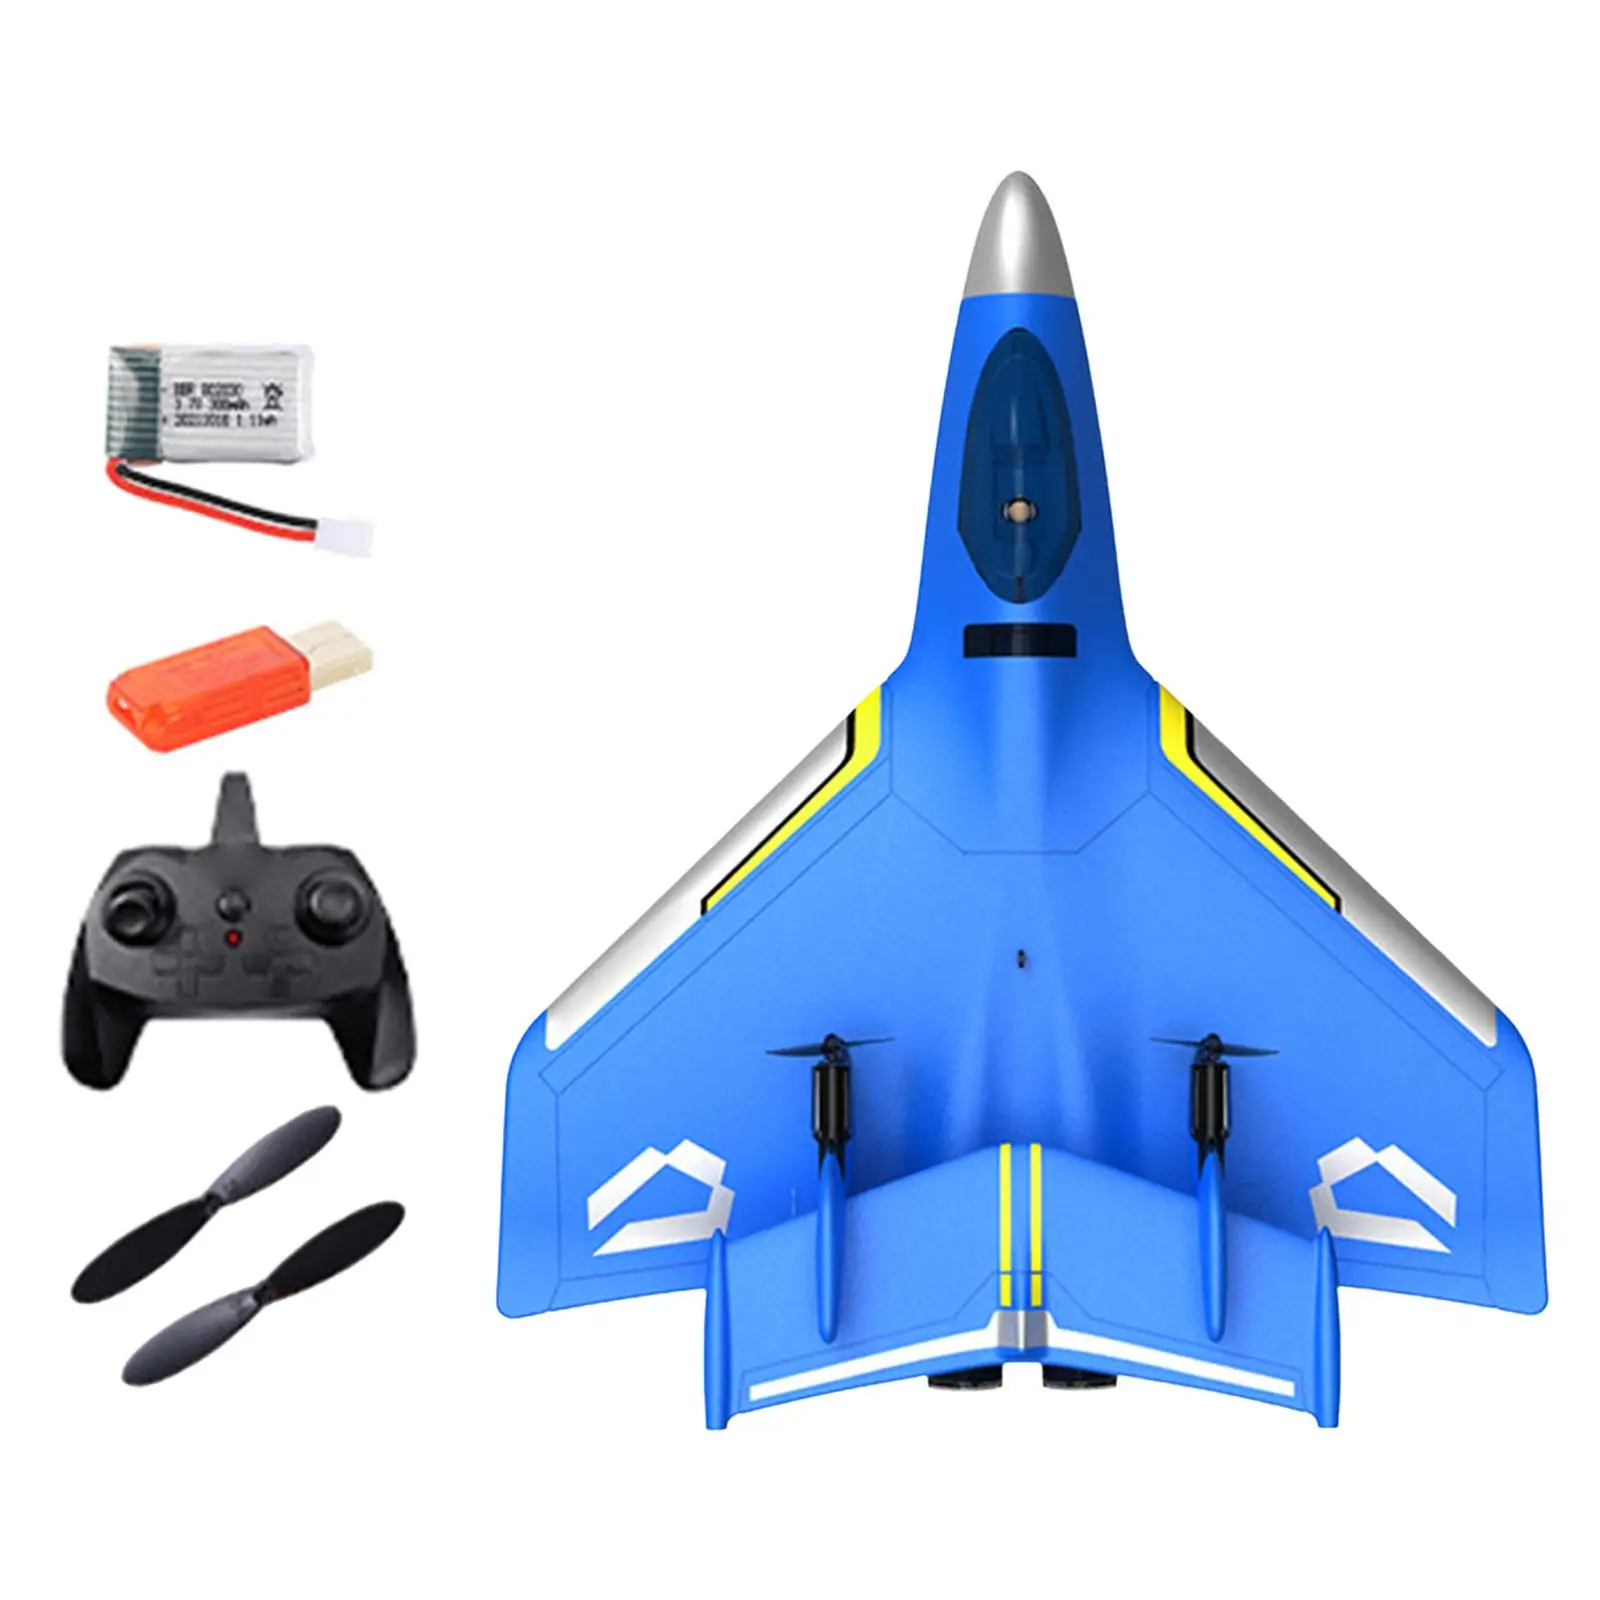 RC Airplane Easy to Control 2.4GHz Outdoor Flighting Toys RC Aircraft Jet Hobby RC Glider for Kids Adults Boys Girls Beginner